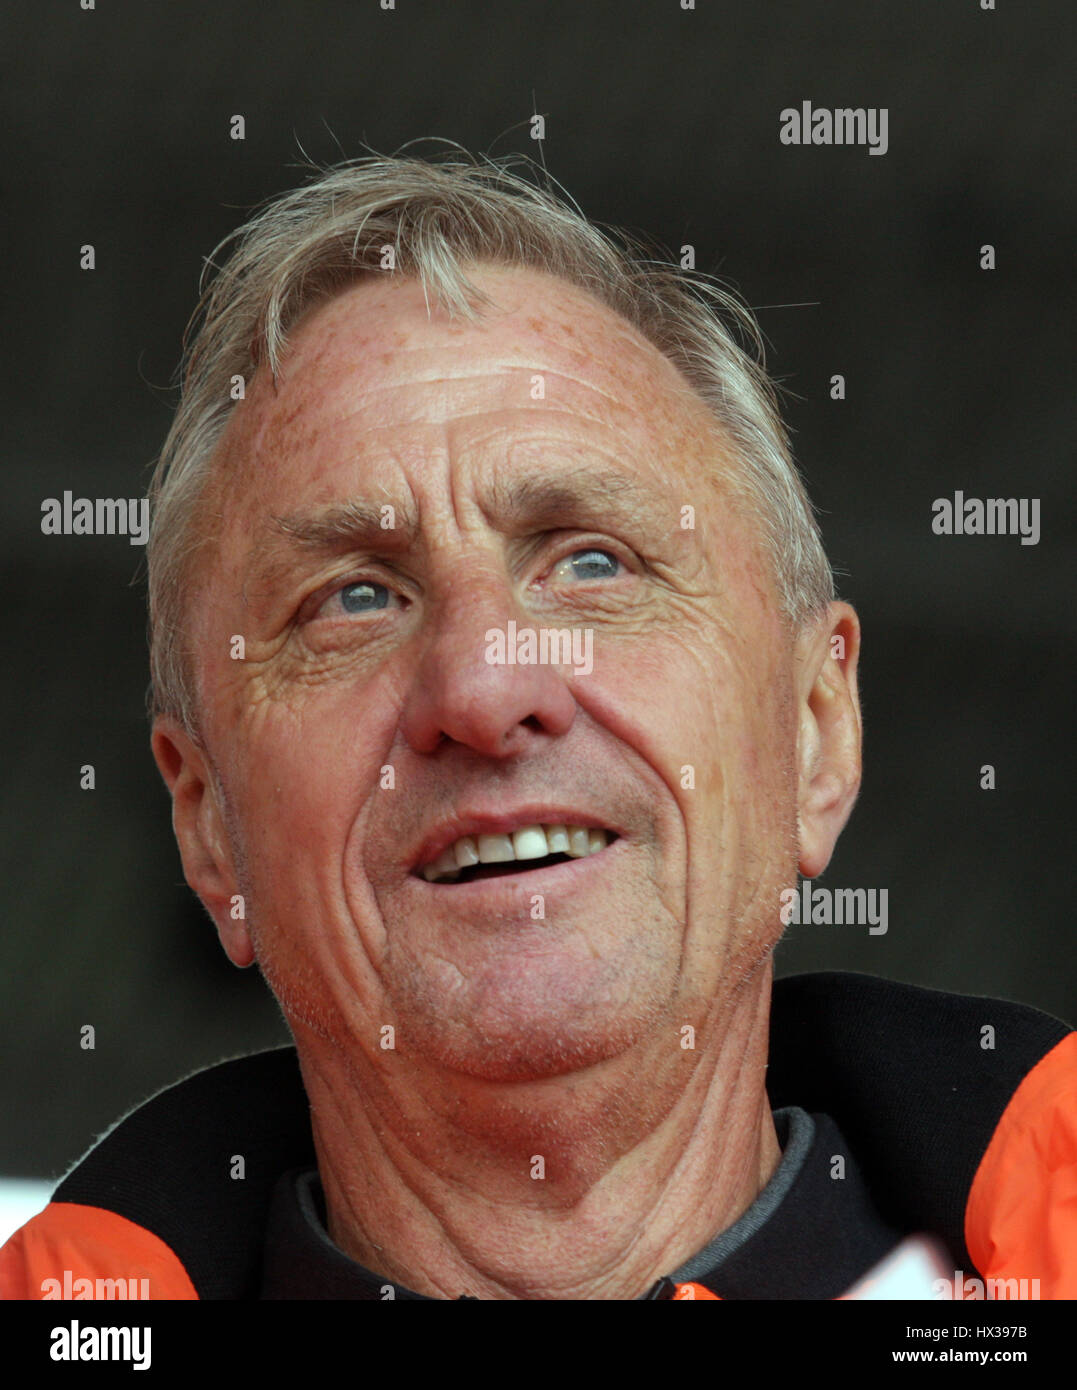 FILE - 09/23/2015 - On March 24 2016 Johan Cruyff (68) died peacefully in  Barcelona, surrounded by his family after a hard fought battle with  cancer.C Stock Photo - Alamy